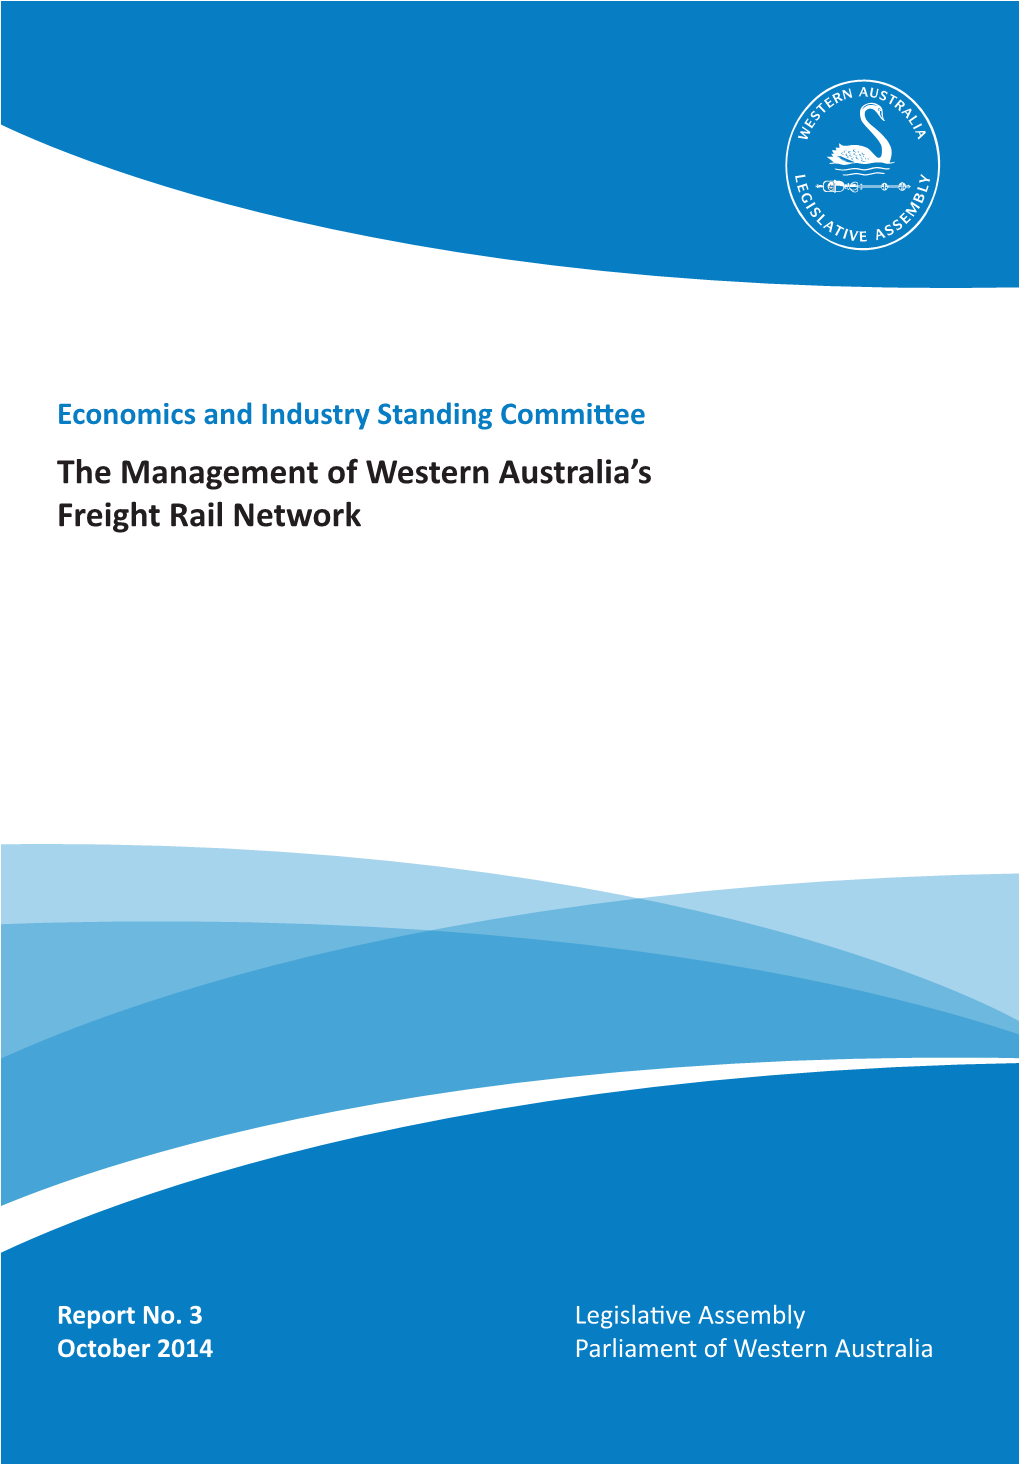 The Management of Western Australia's Freight Rail Network